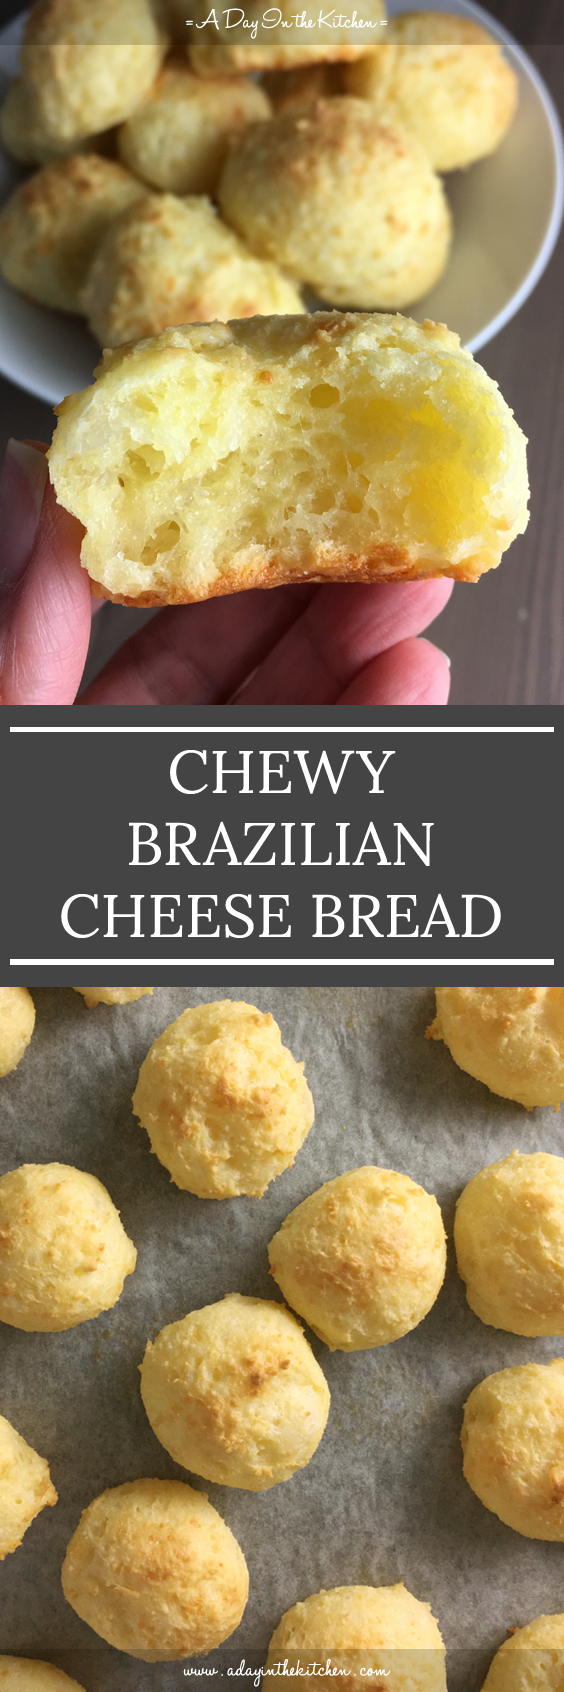 Chewy Brazilian Cheese Bread | A DAY IN THE KITCHEN